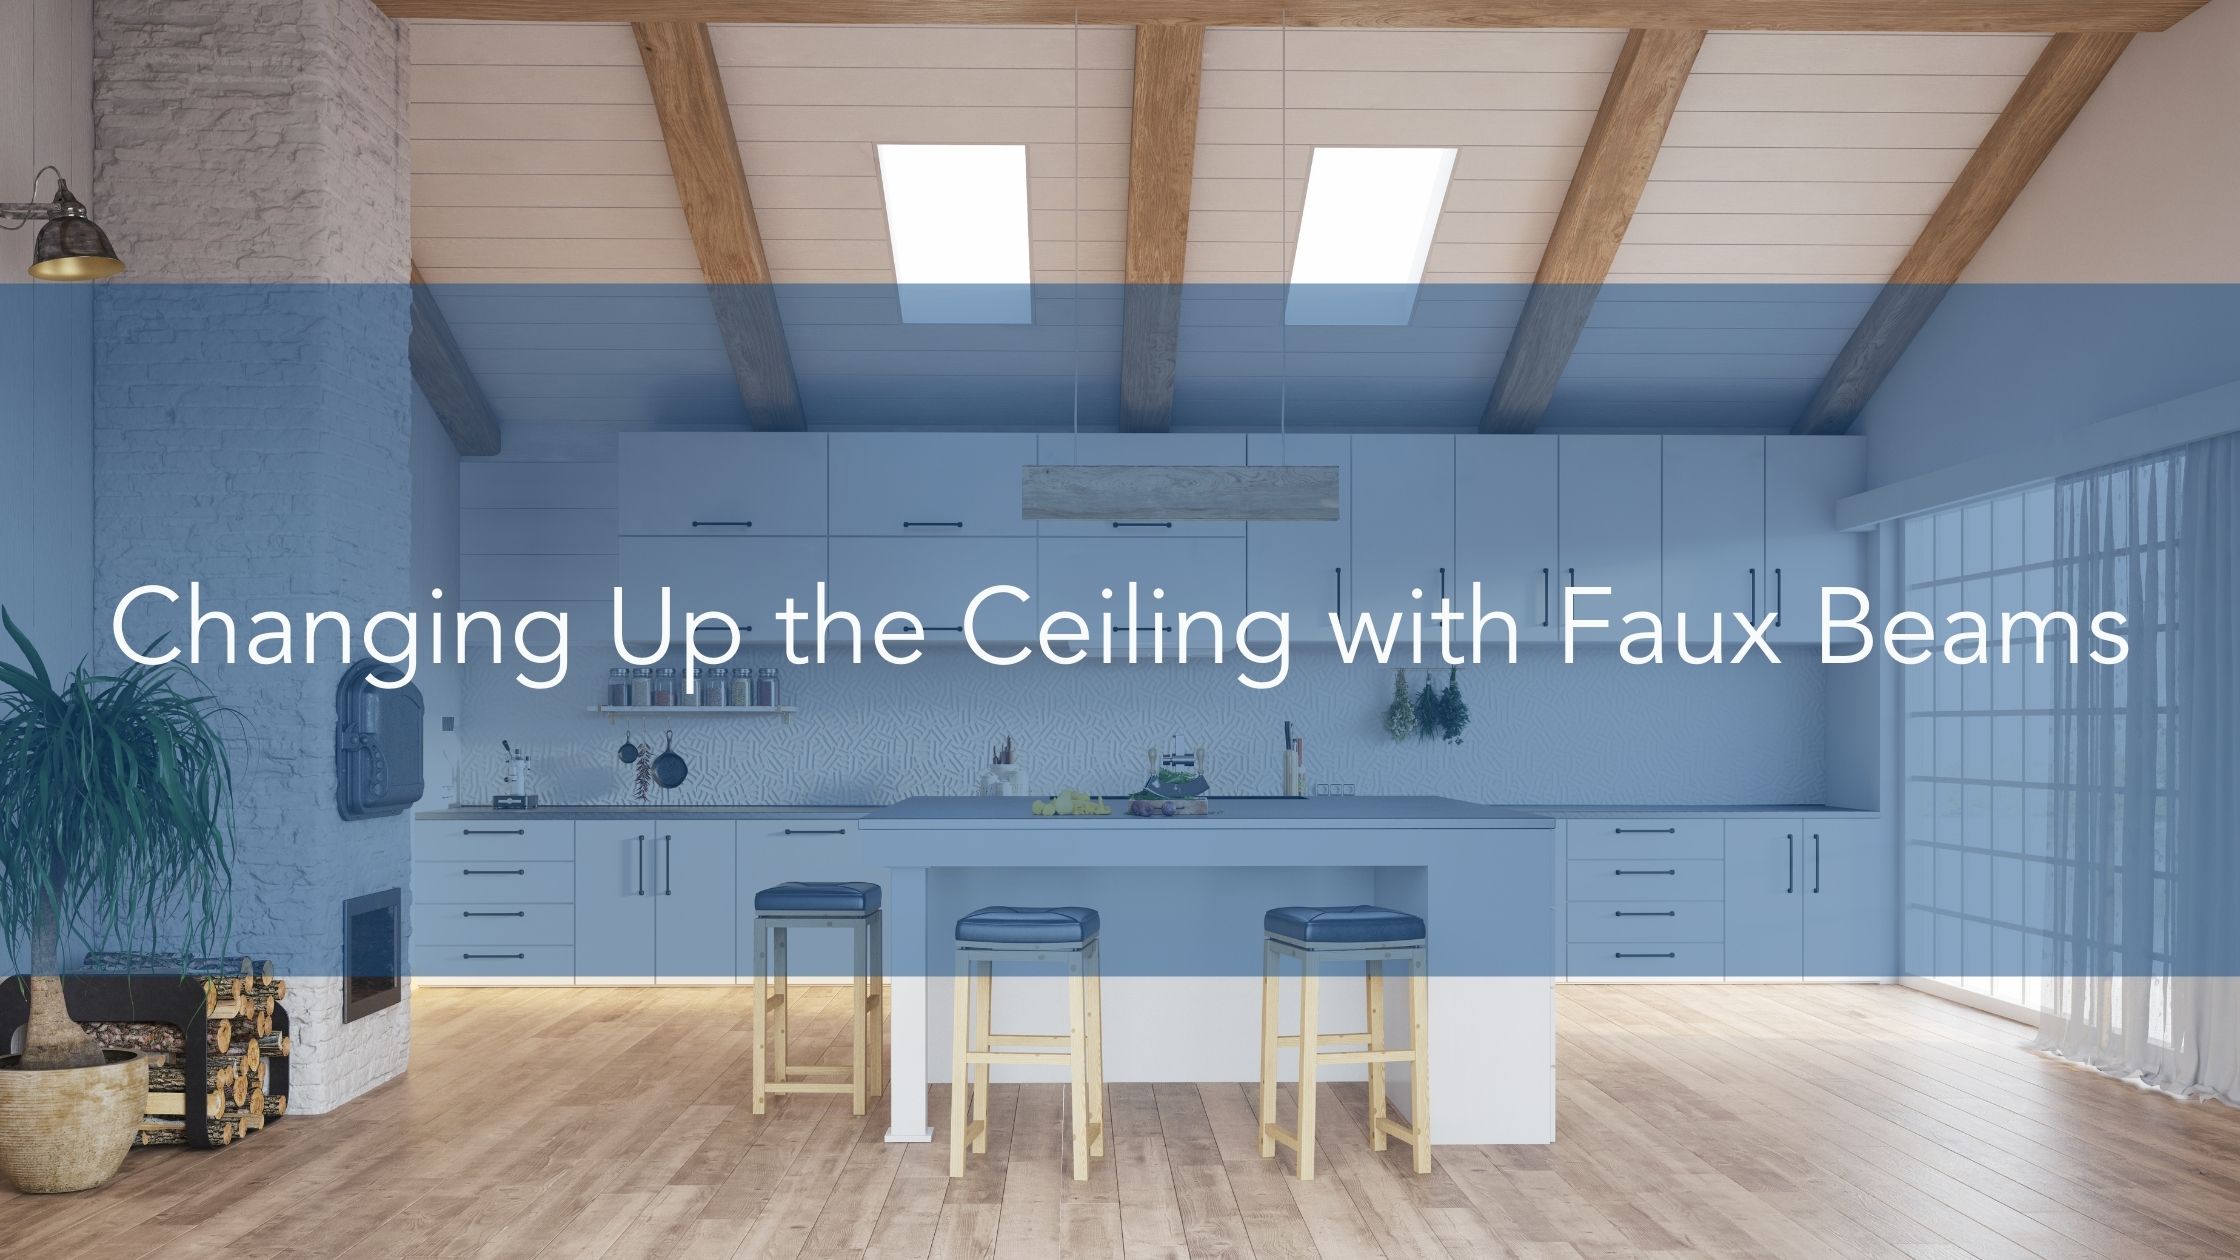 https://handymanconnection.com/wp-content/uploads/2022/02/Changing-Up-the-Ceiling-with-Faux-Beams.jpg